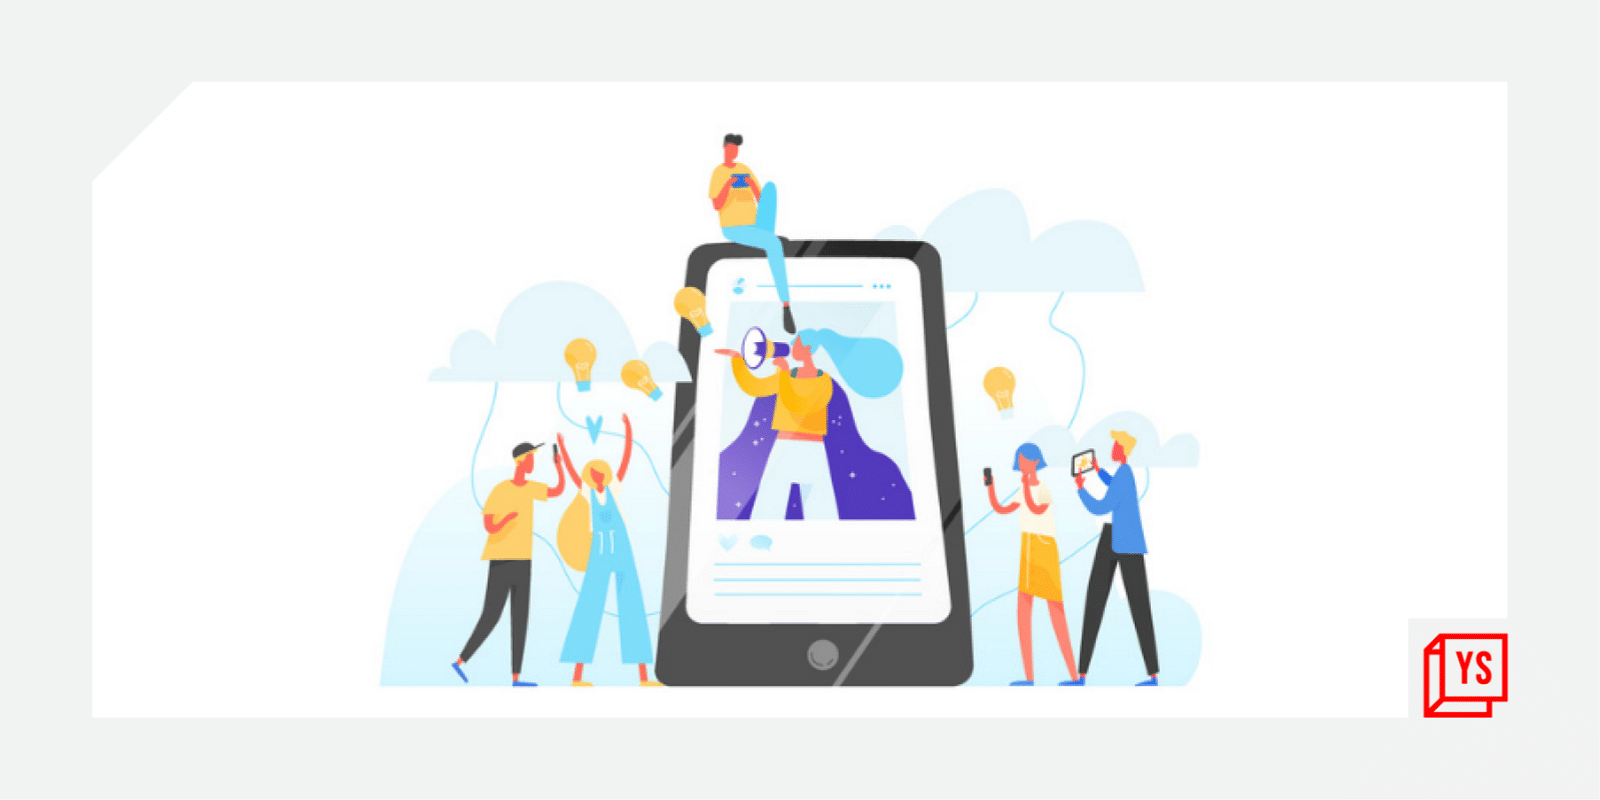 You are currently viewing The power of micro-influencers in building authentic connections in a digital world